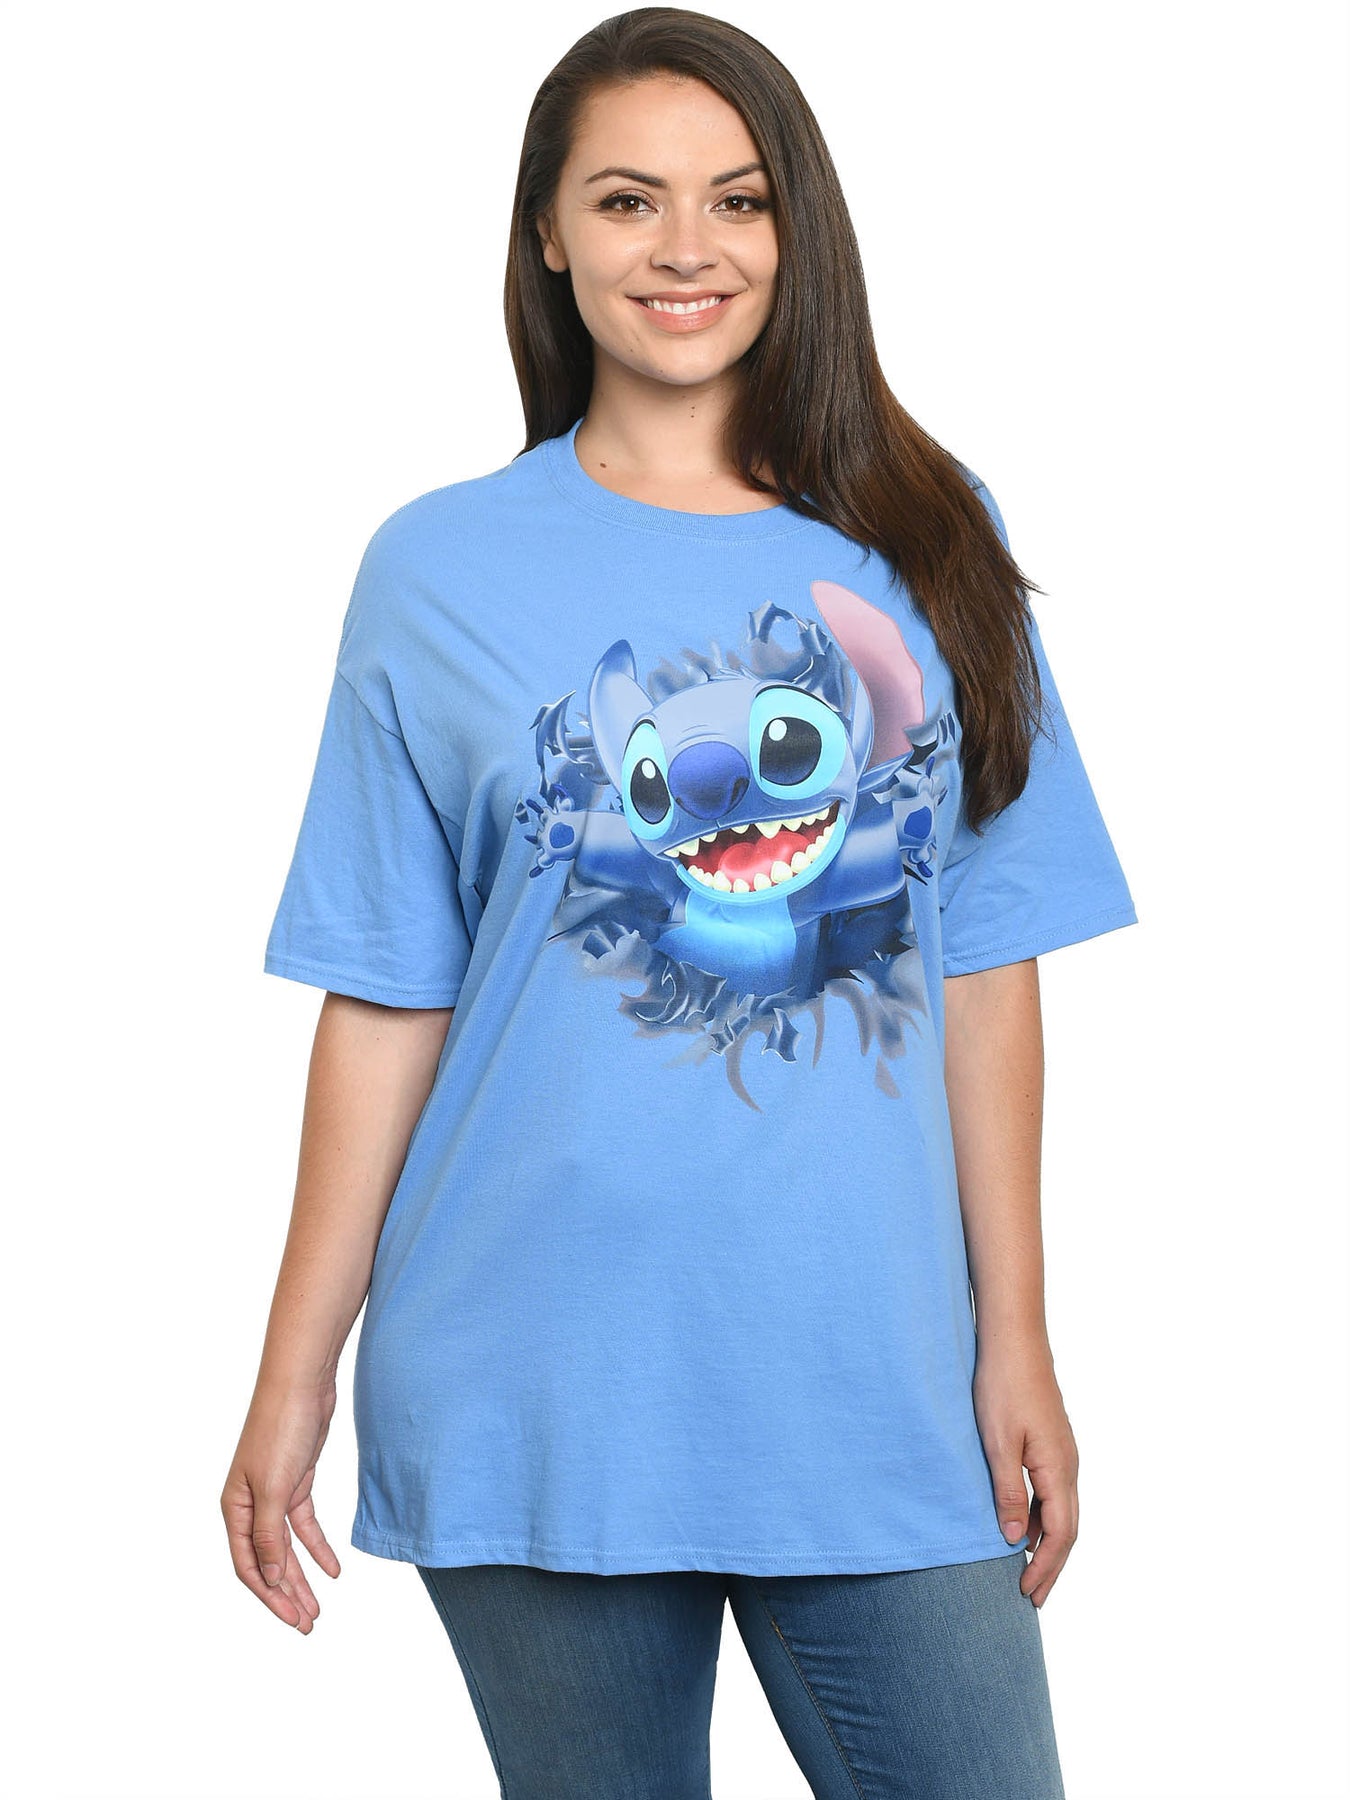 Disney Stitch T-Shirt Blue Front Back Design Women's (Size Small Only) –  Open and Clothing